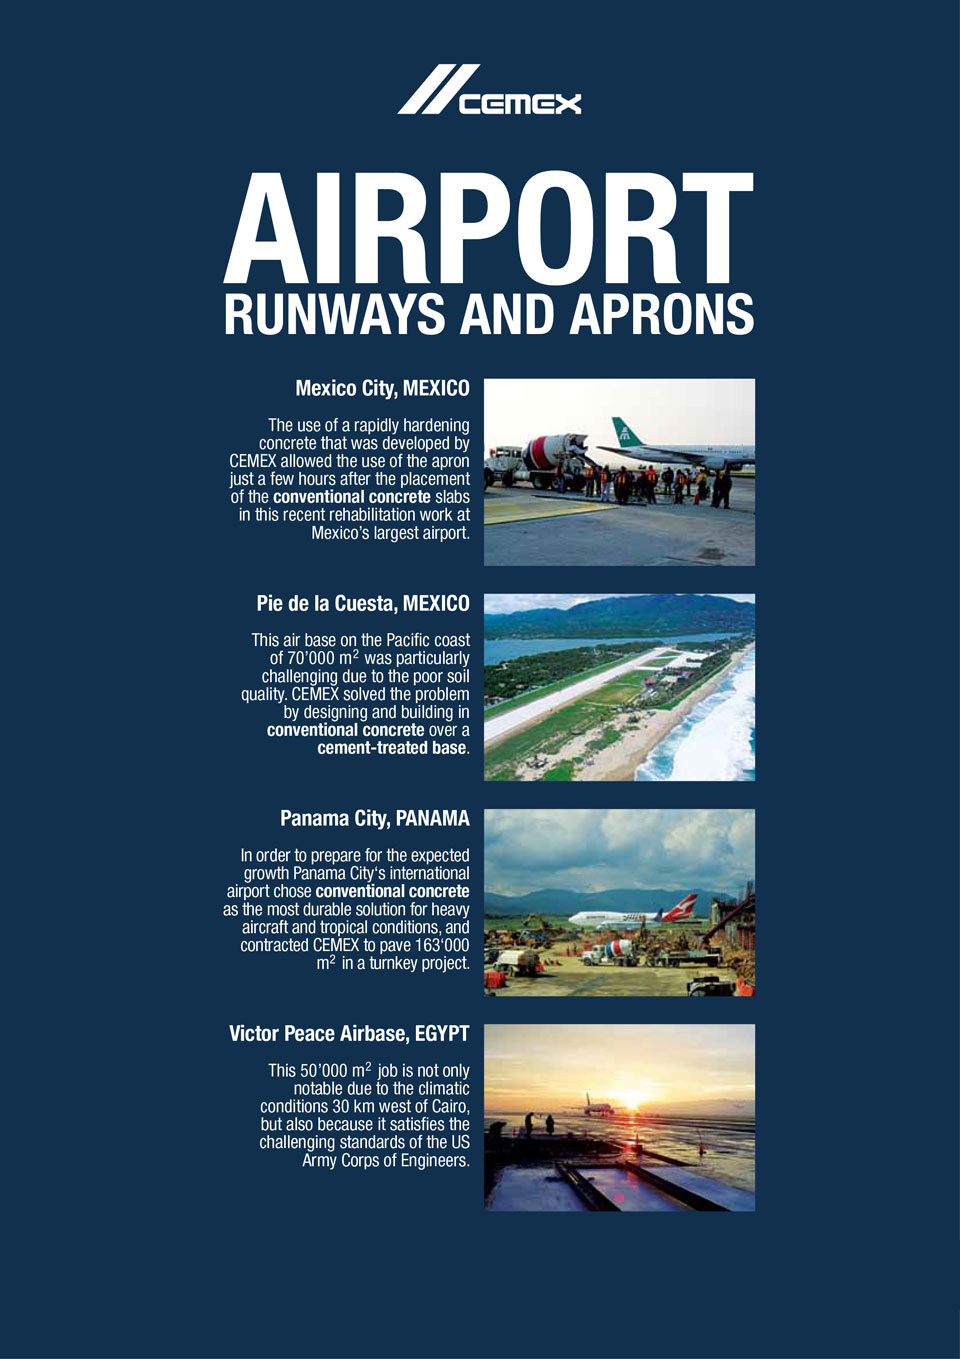 the image shows several airports CEMEX has helped with the construction of